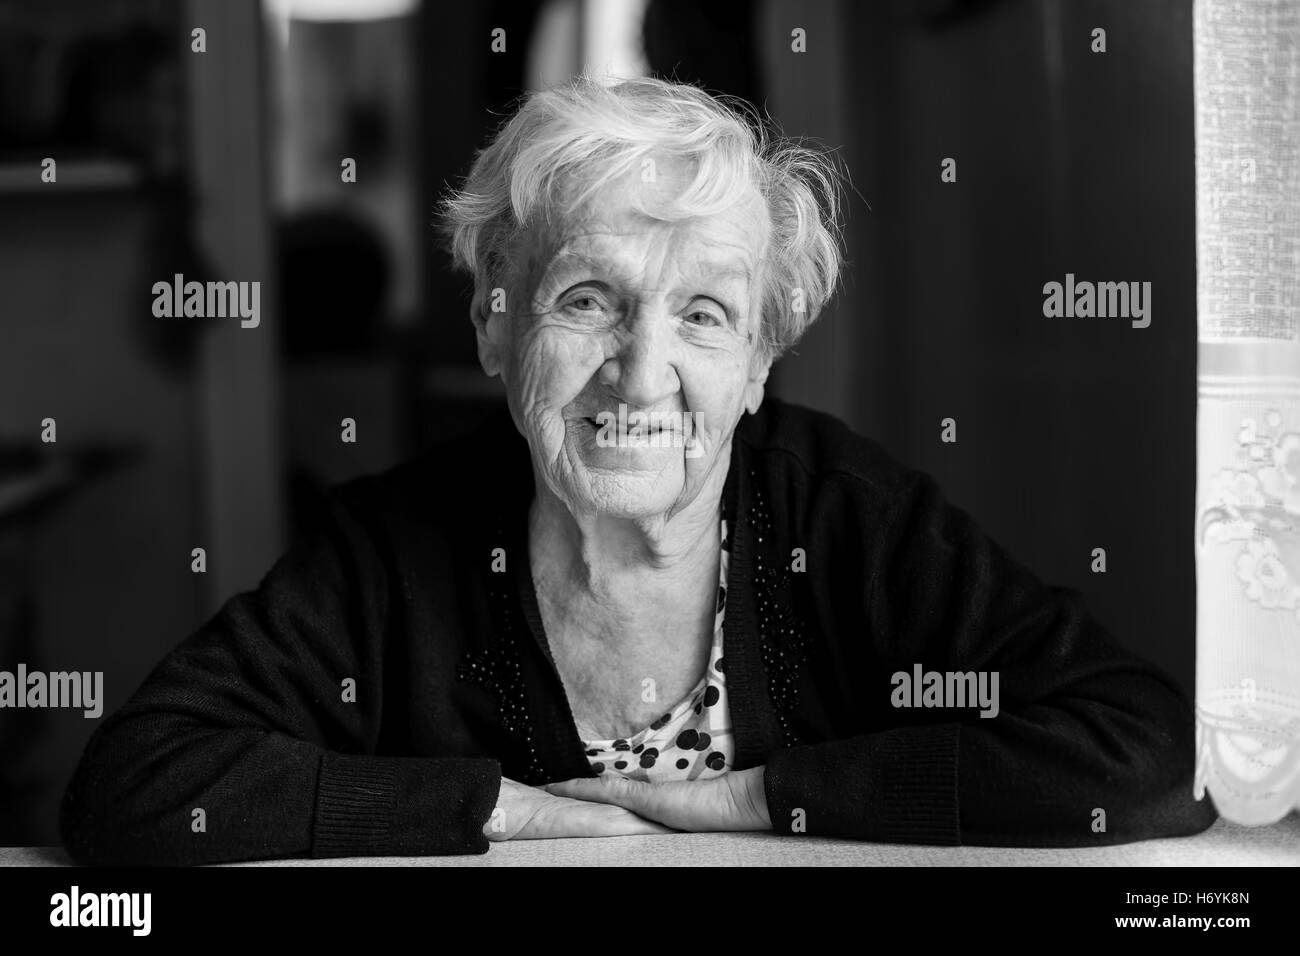 Elderly woman portrait. Black-and-white photo of high contrast. Stock Photo